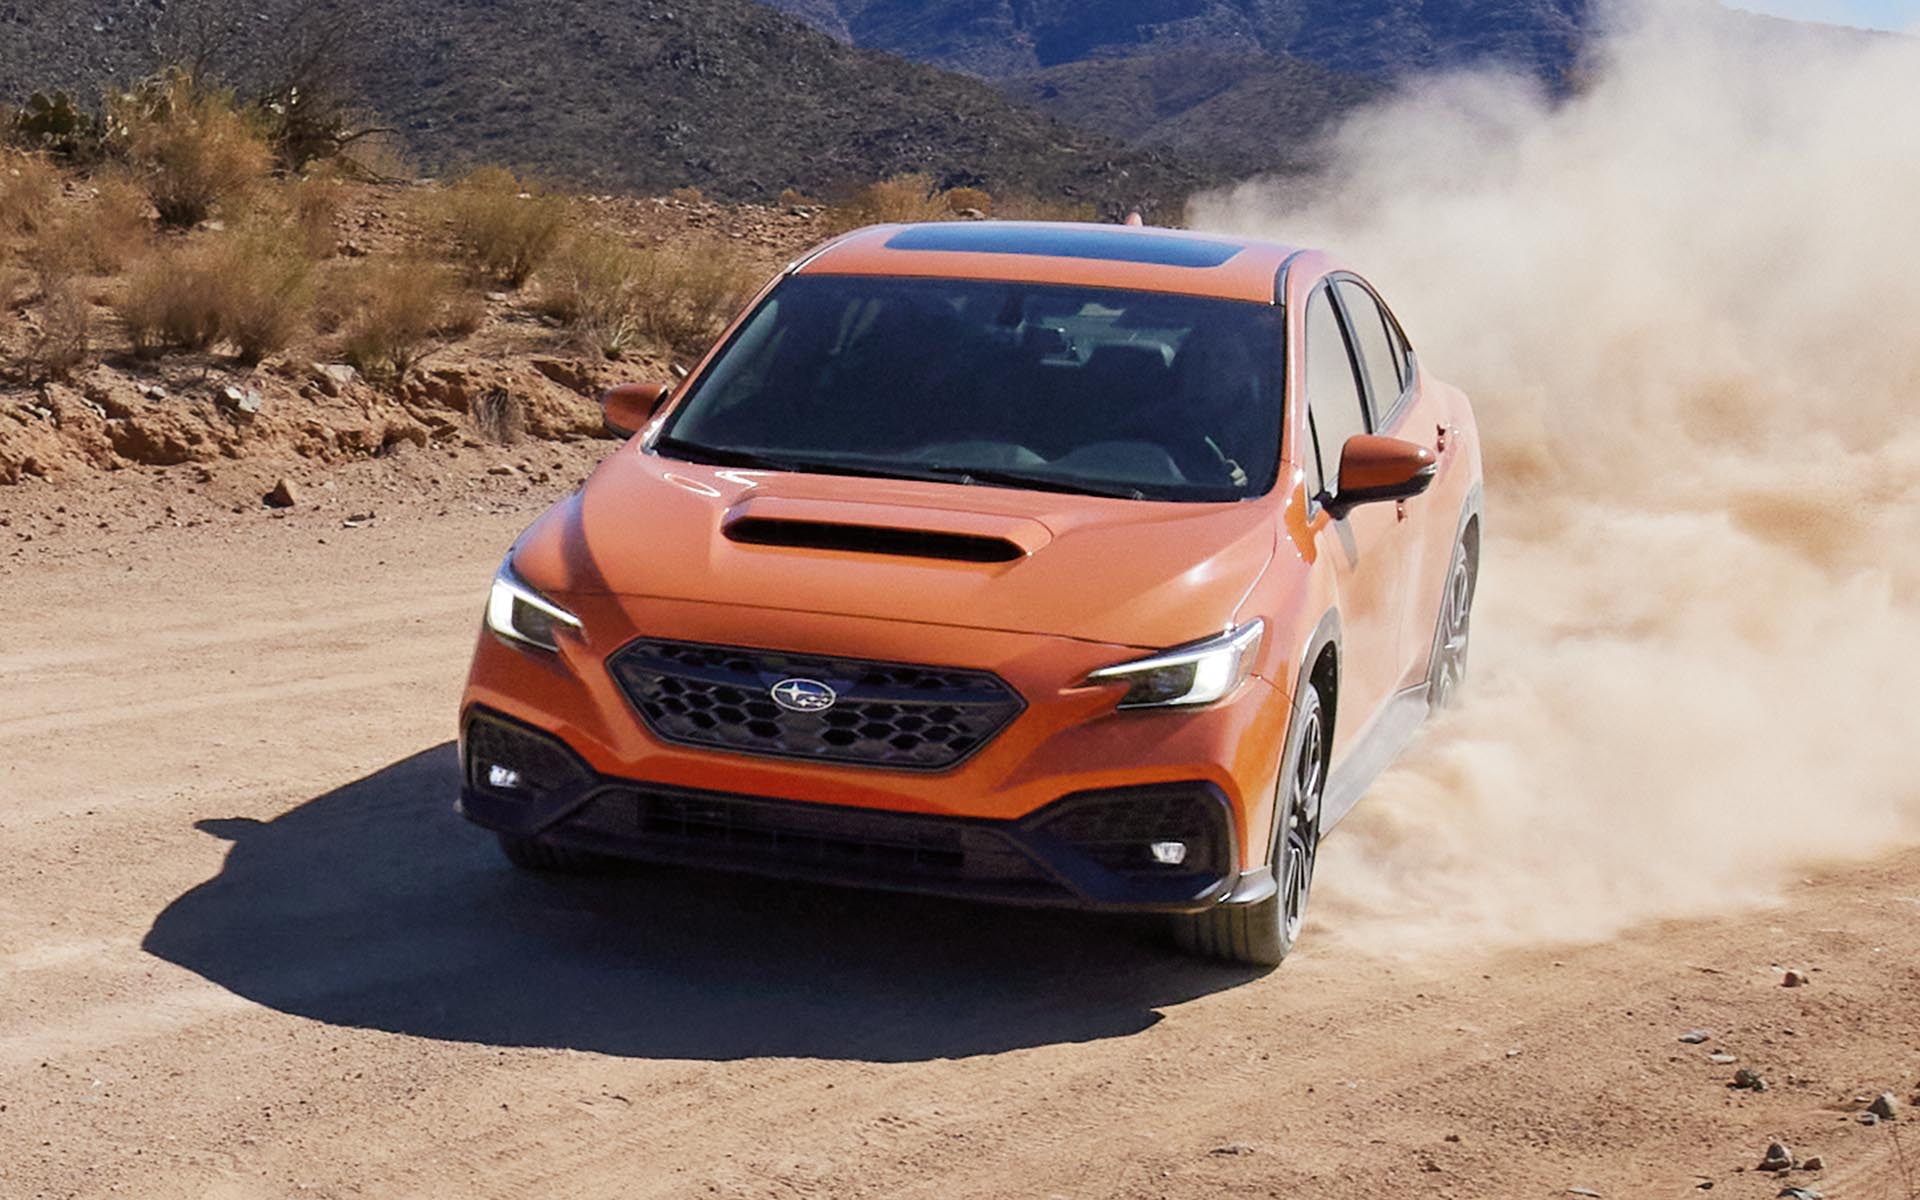 The 2022 Subaru kicking up dirt while driving on a desert road.  